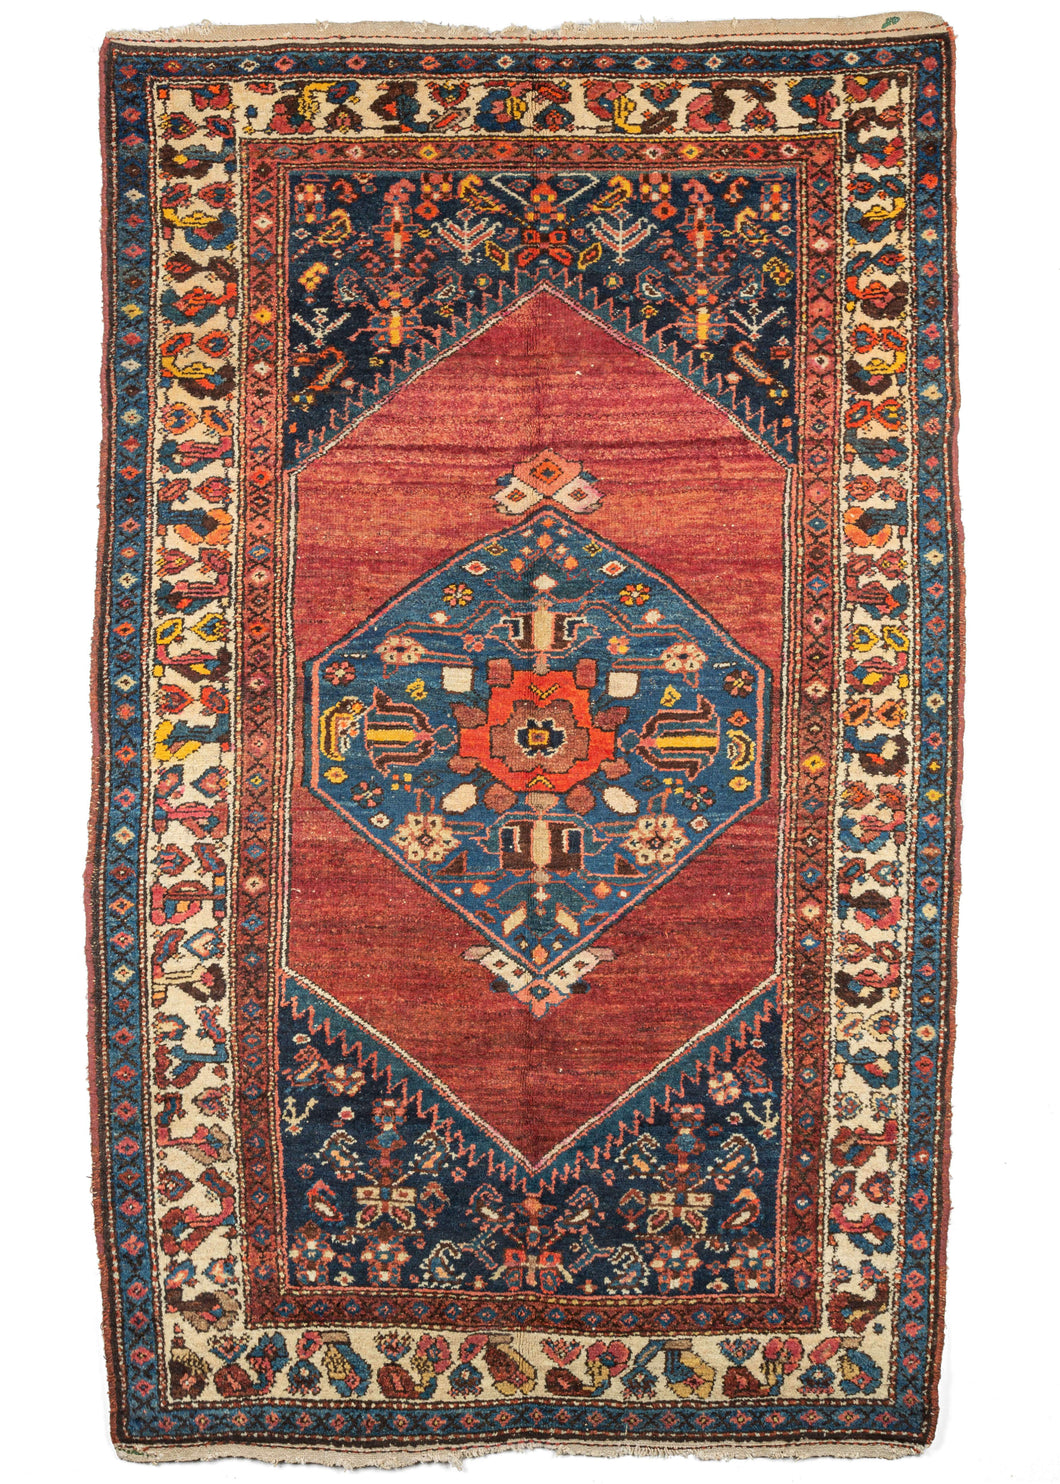 Antique NW Persian Hamadan scatter rug featurinng a pulsating red field between an indigo central medallion and cornices and contains three distinct borders in red, ivory, and blue. The reds on this rug have been “painted” over using fountain pens and ink, a practice common during the 1920s and often associated with Sarouk rugs of the period.